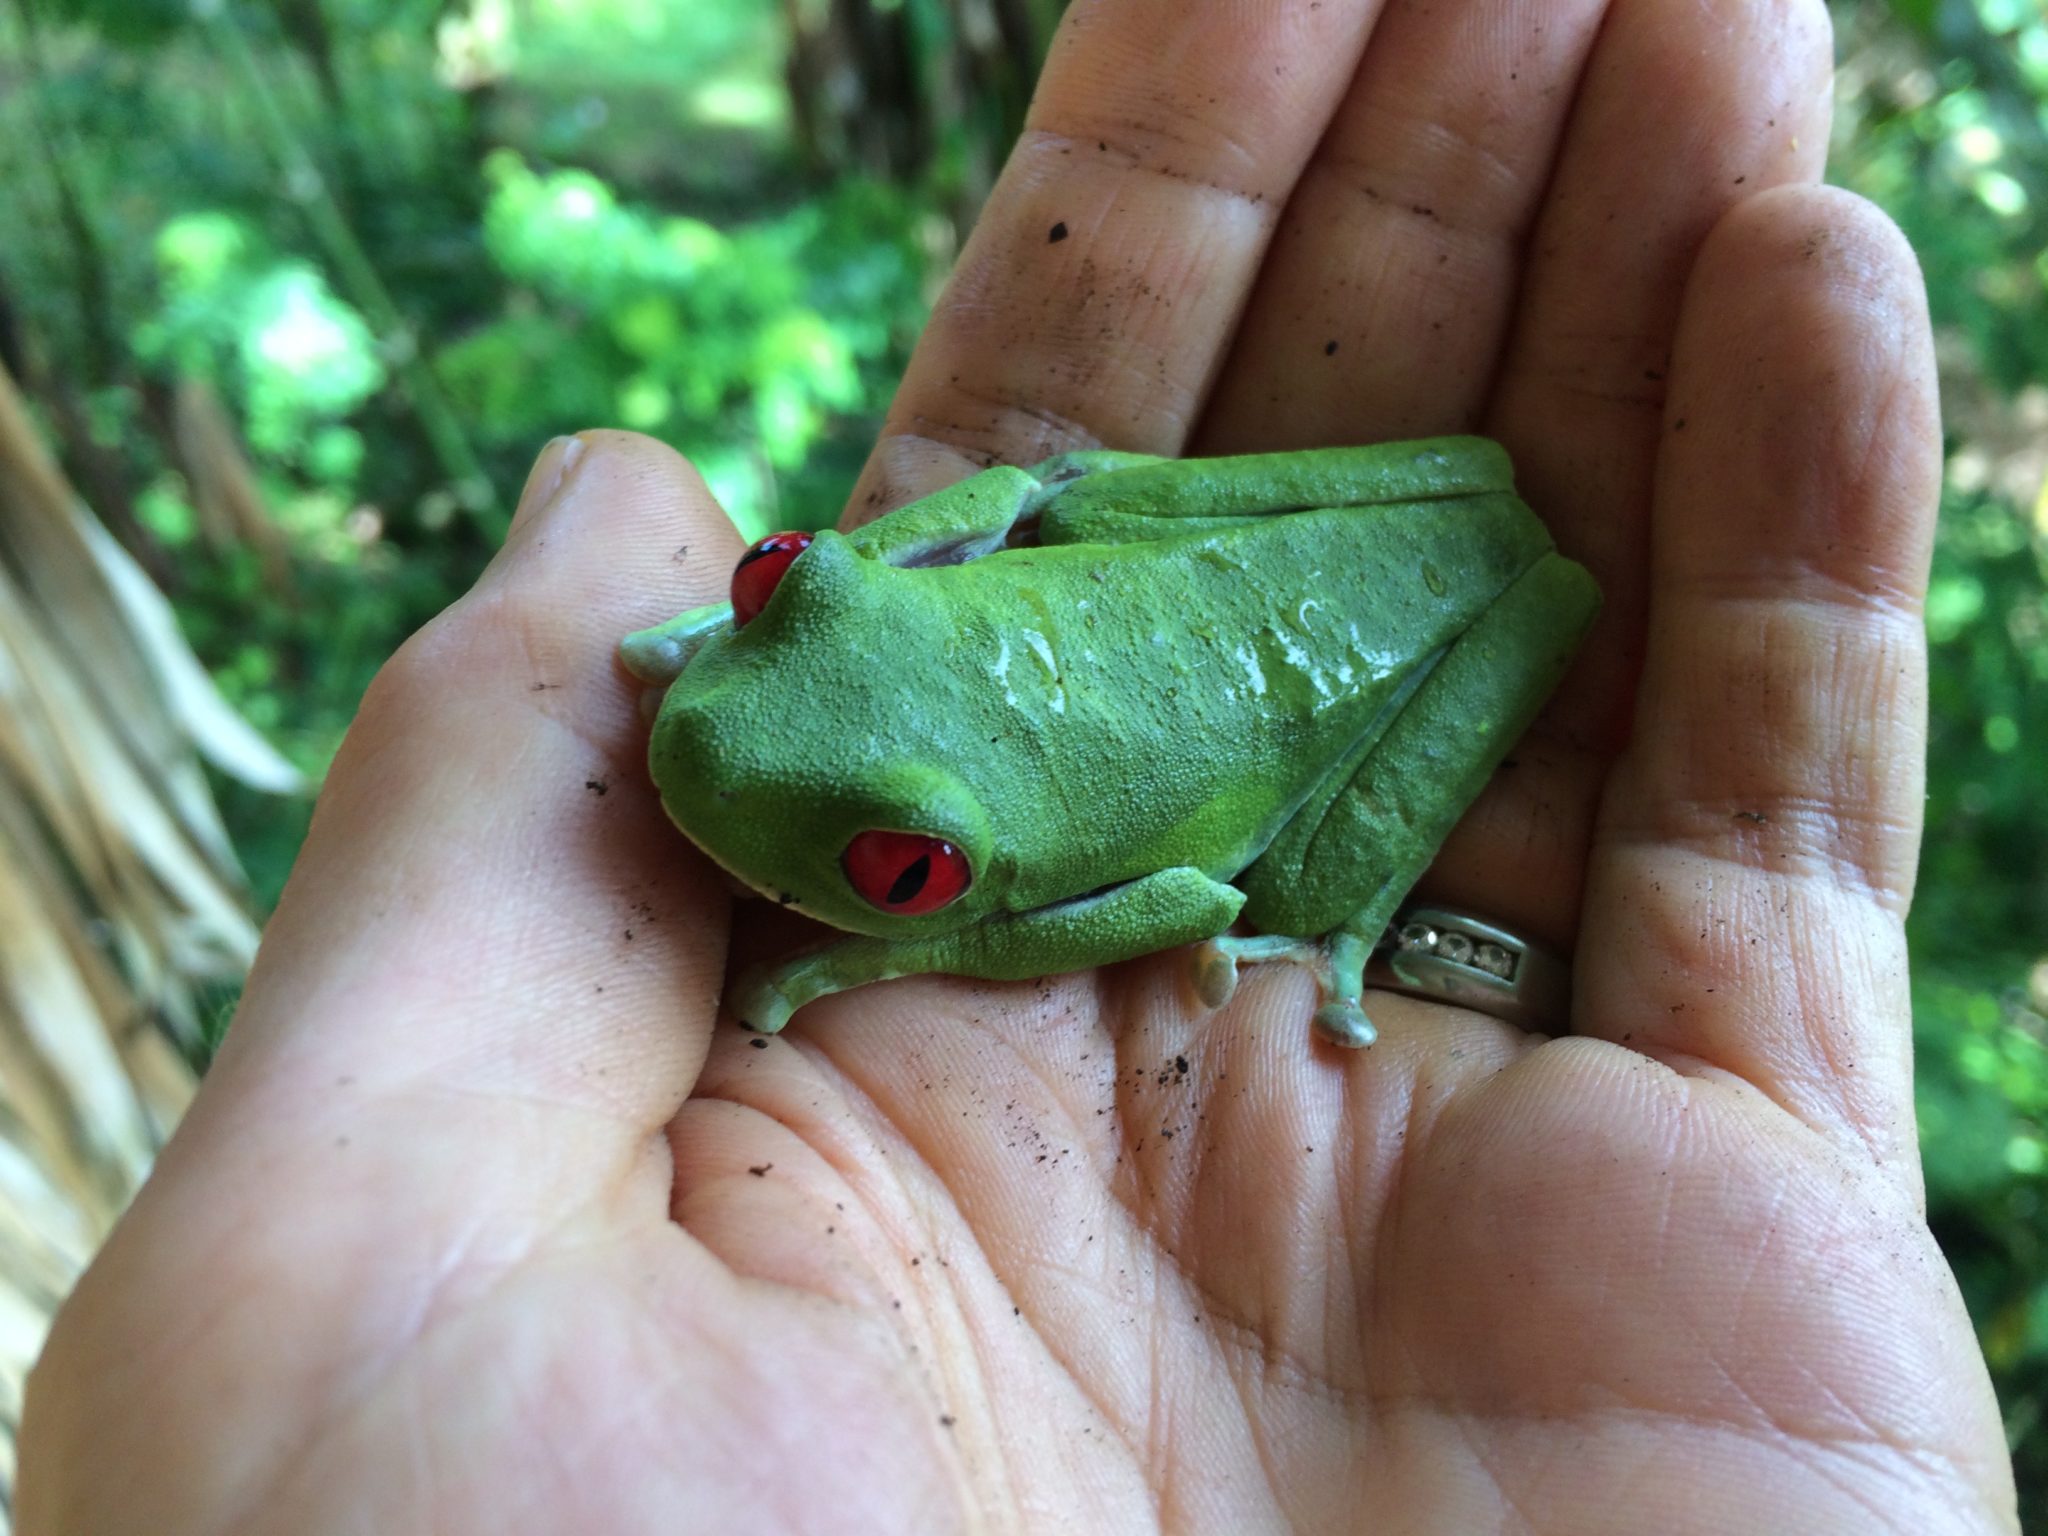 Costa Rica's iconic nocturnal tree frog. Kermit green with bright red eyes. Awakened from a nap. Sitting in my hand. Priceless. 